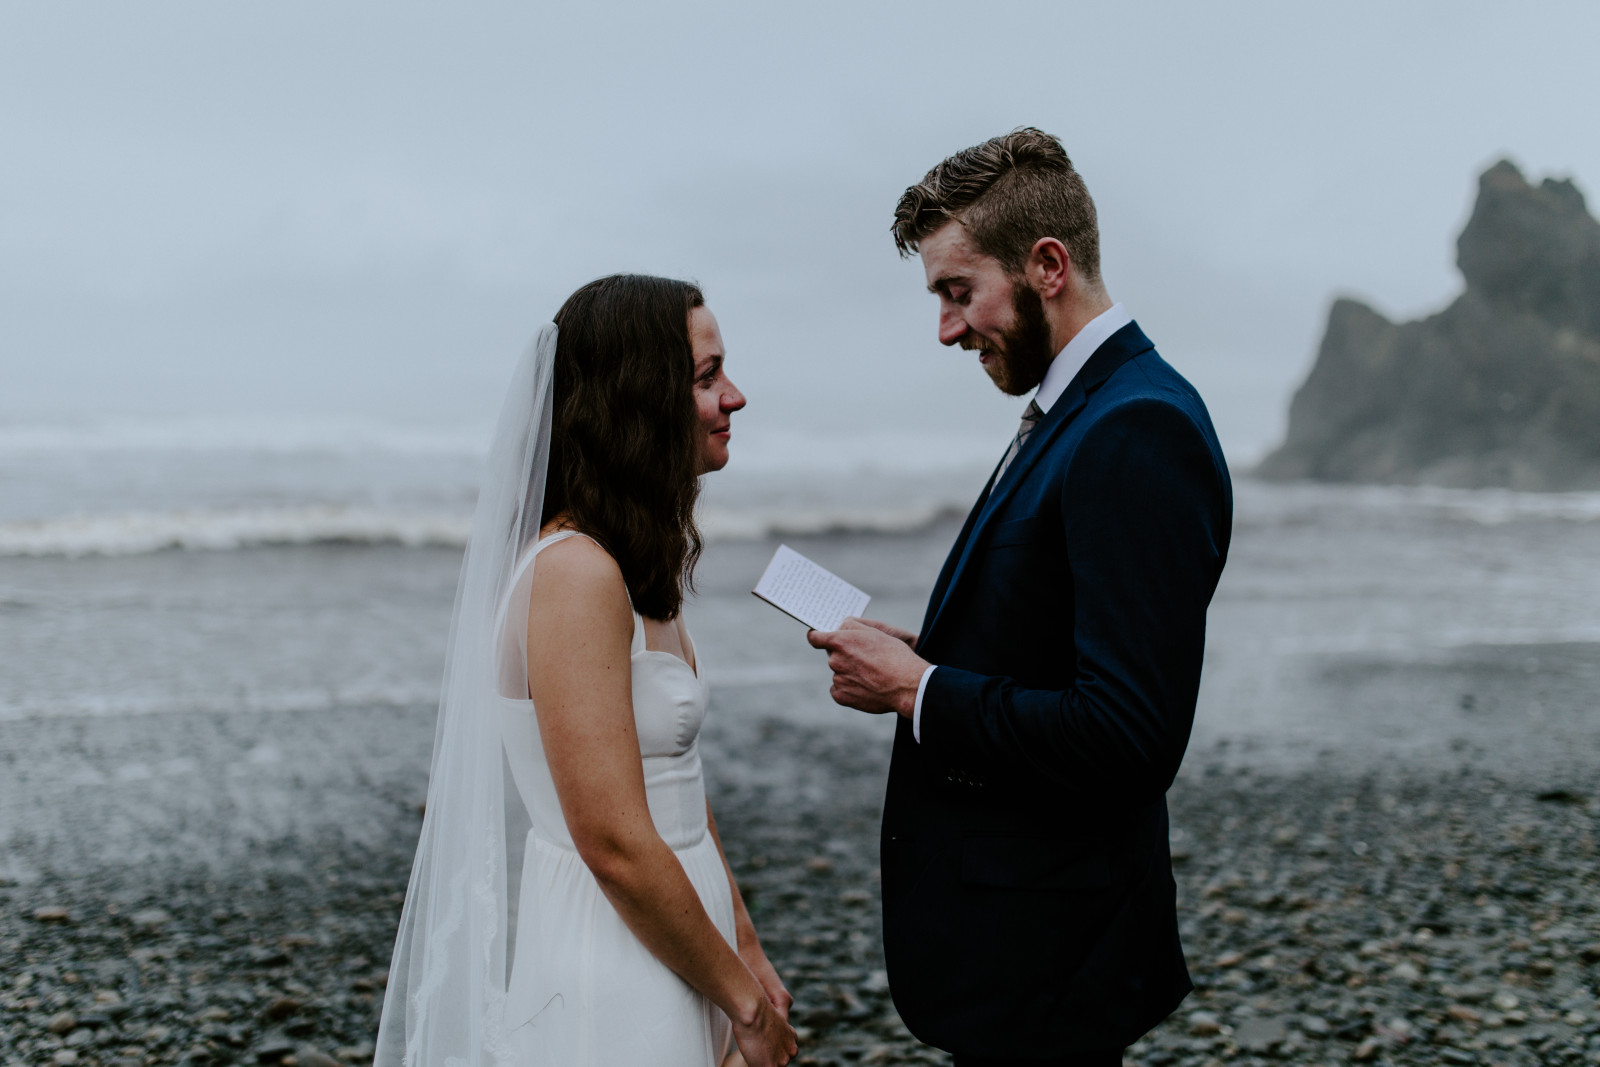 Corey reading vows during the elopement. Elopement photography in the Olympic National Park by Sienna Plus Josh.